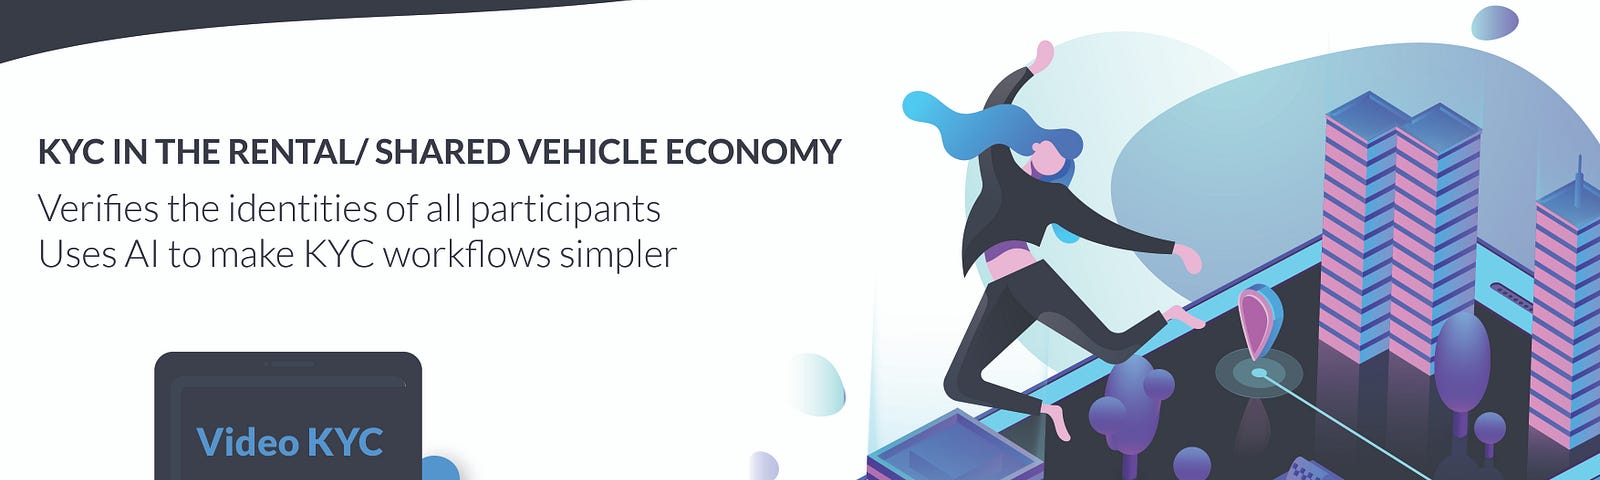 In the rental/shared vehicle economy, Signzy can make KYC simple with AI driven workflows. Video KYC is the future.